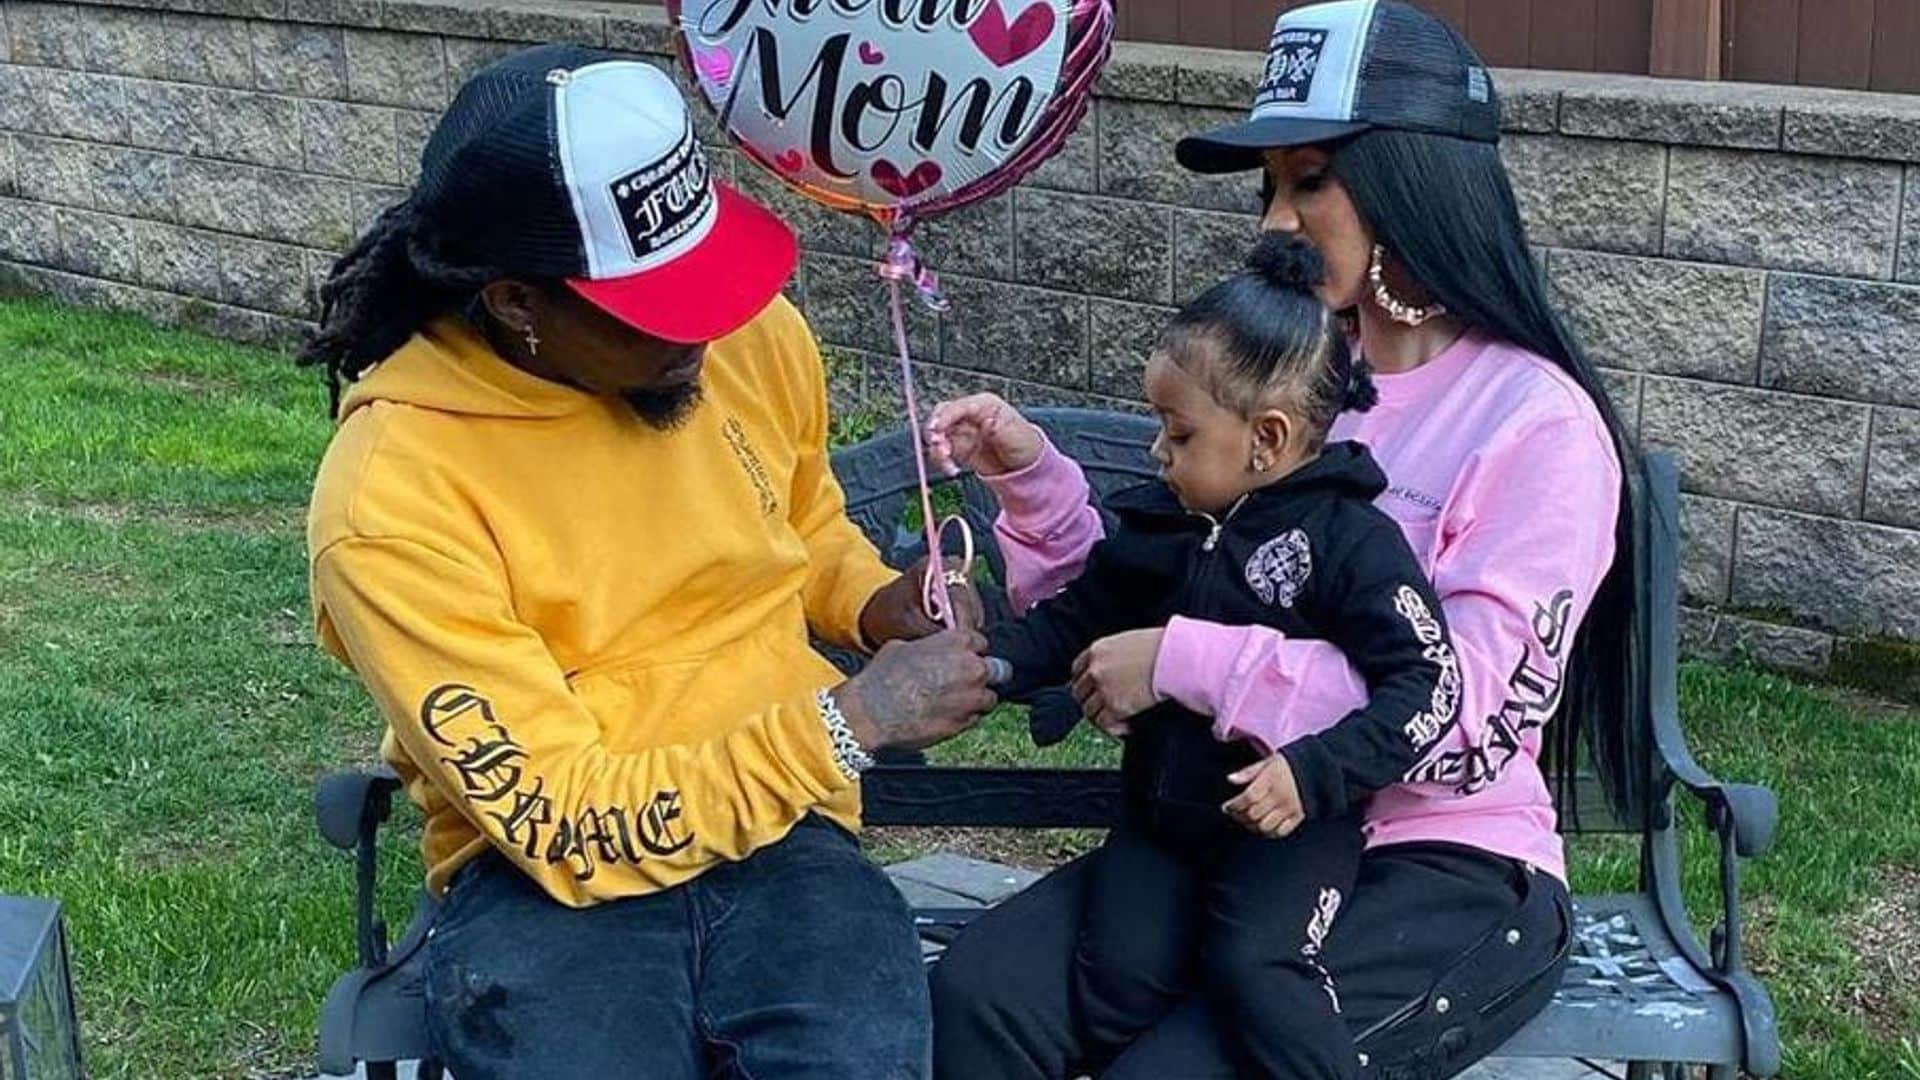 Cardi B’s daughter is cowgirl chic – see her latest outfit styled by mom